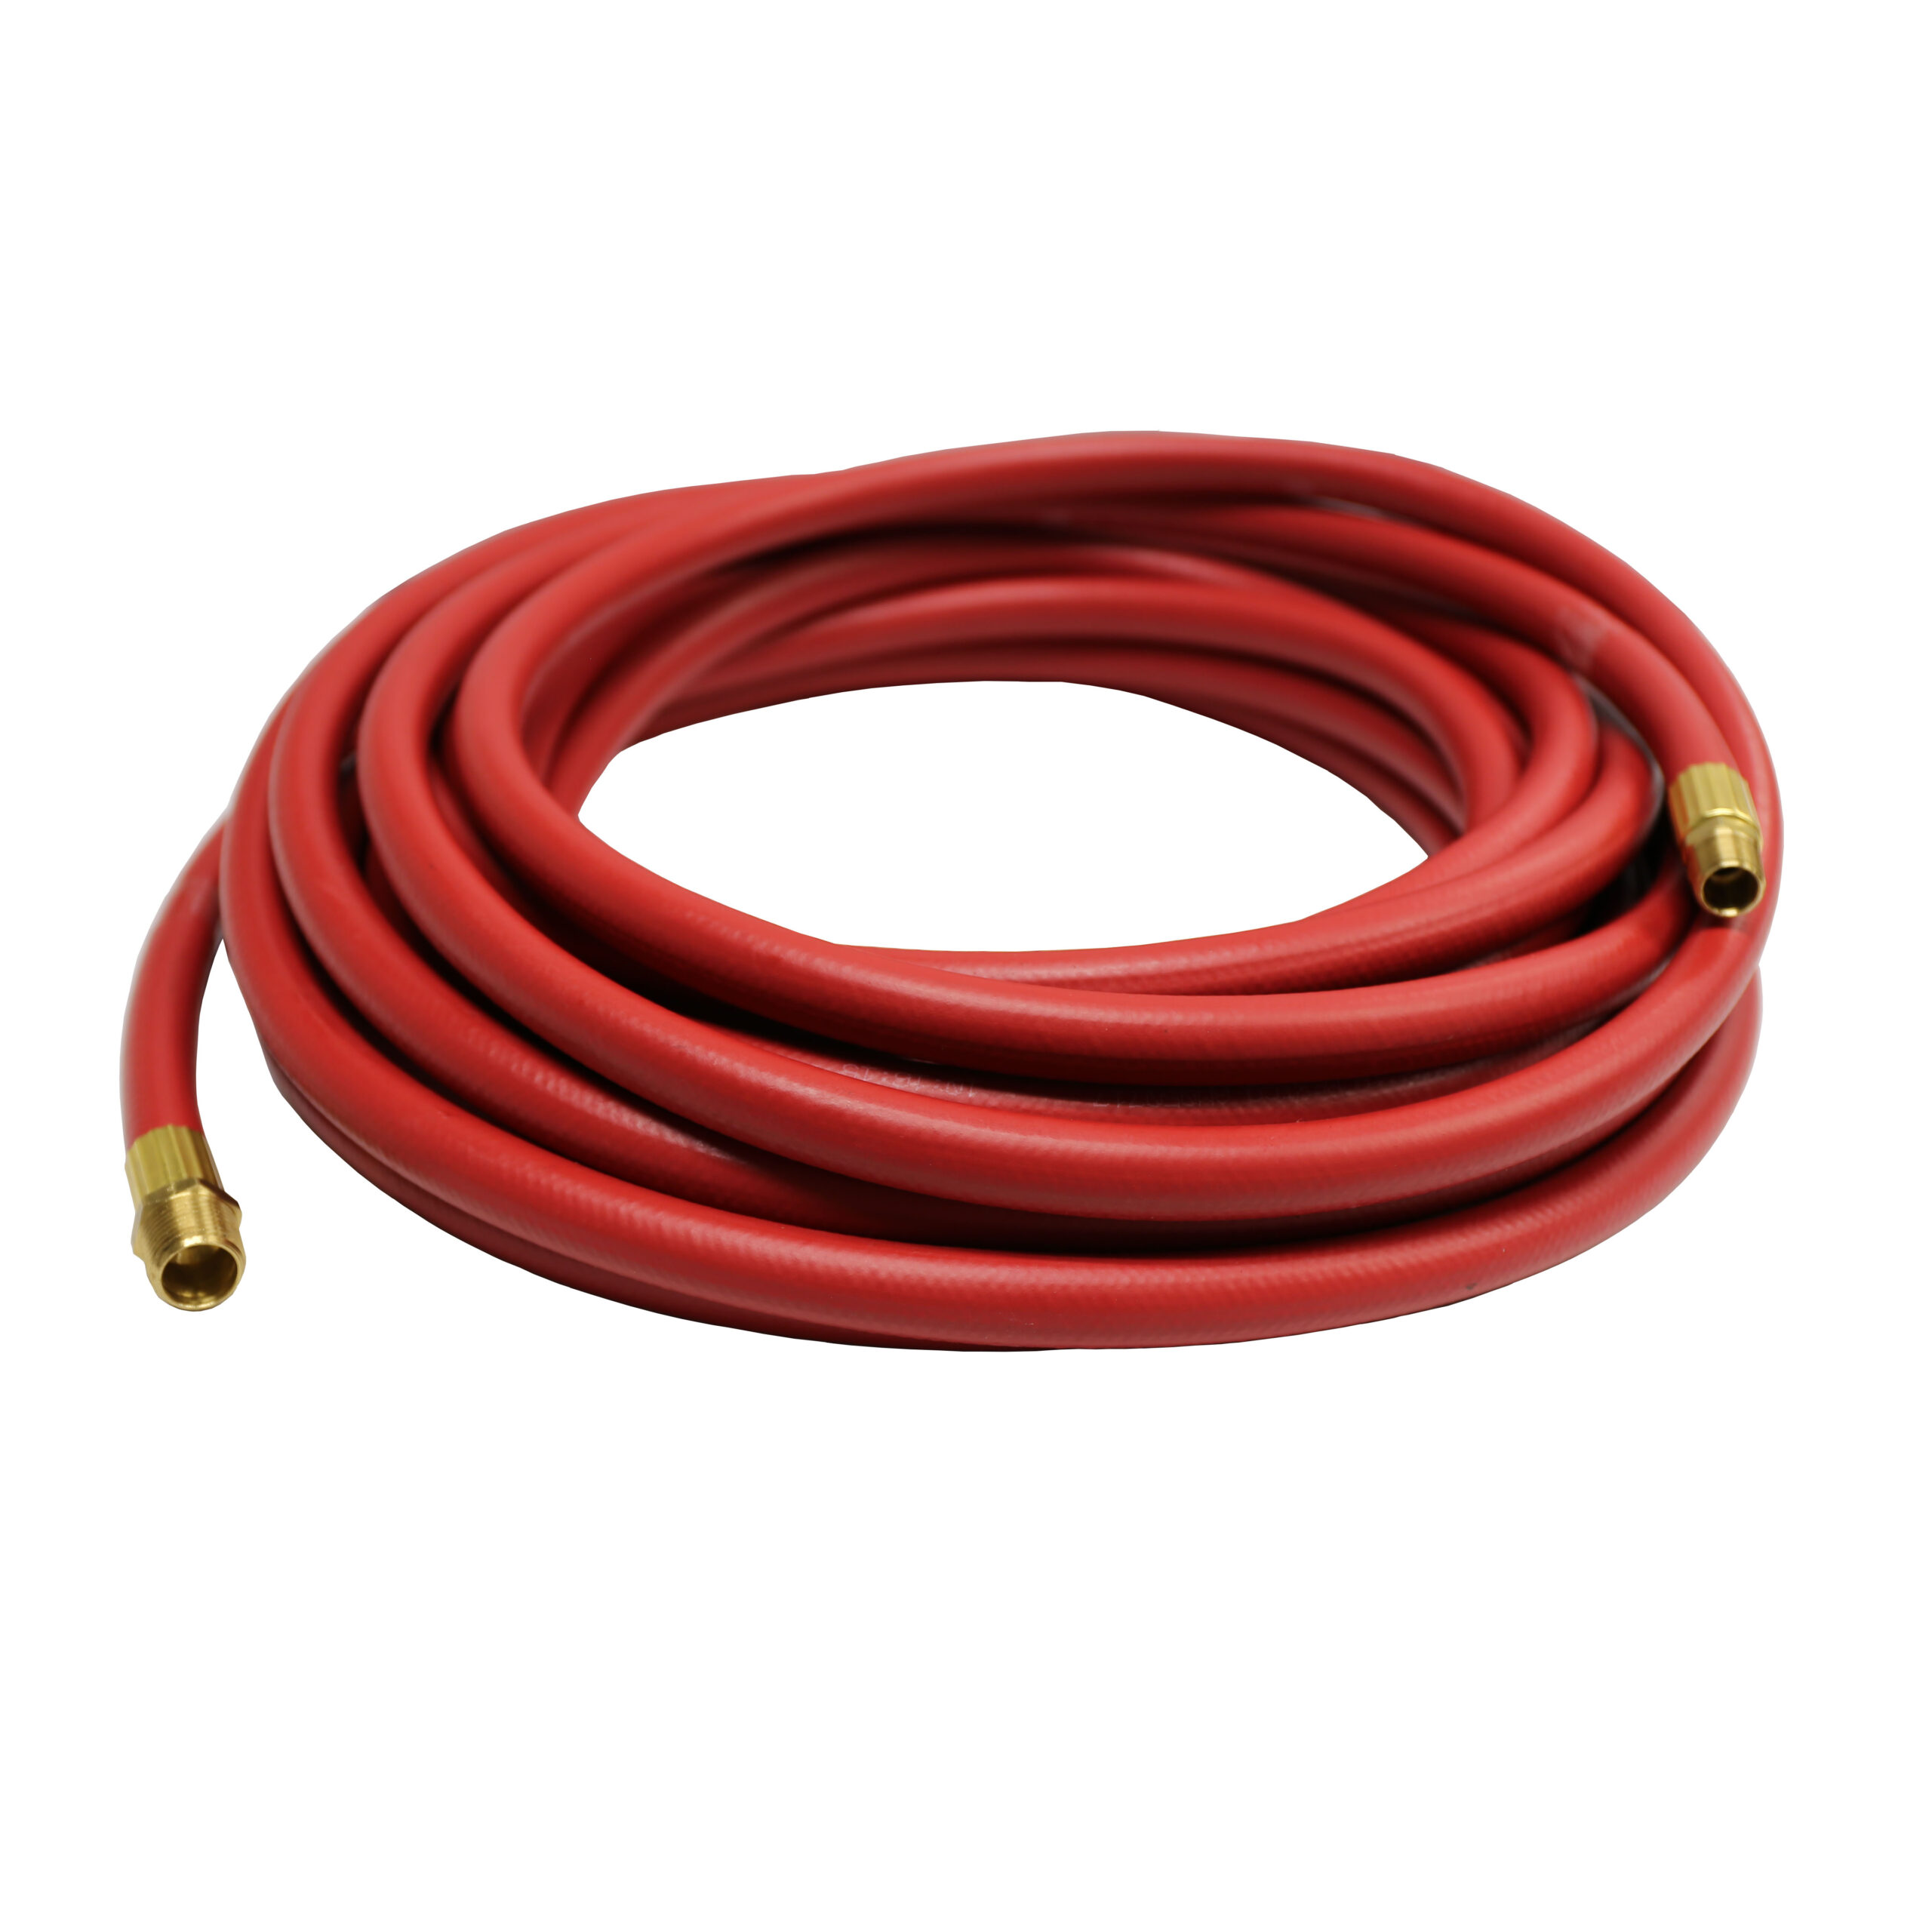 Reelcraft 601143-100 - 3/8 in. x 100 ft. Low Pressure Rubber Air Hose